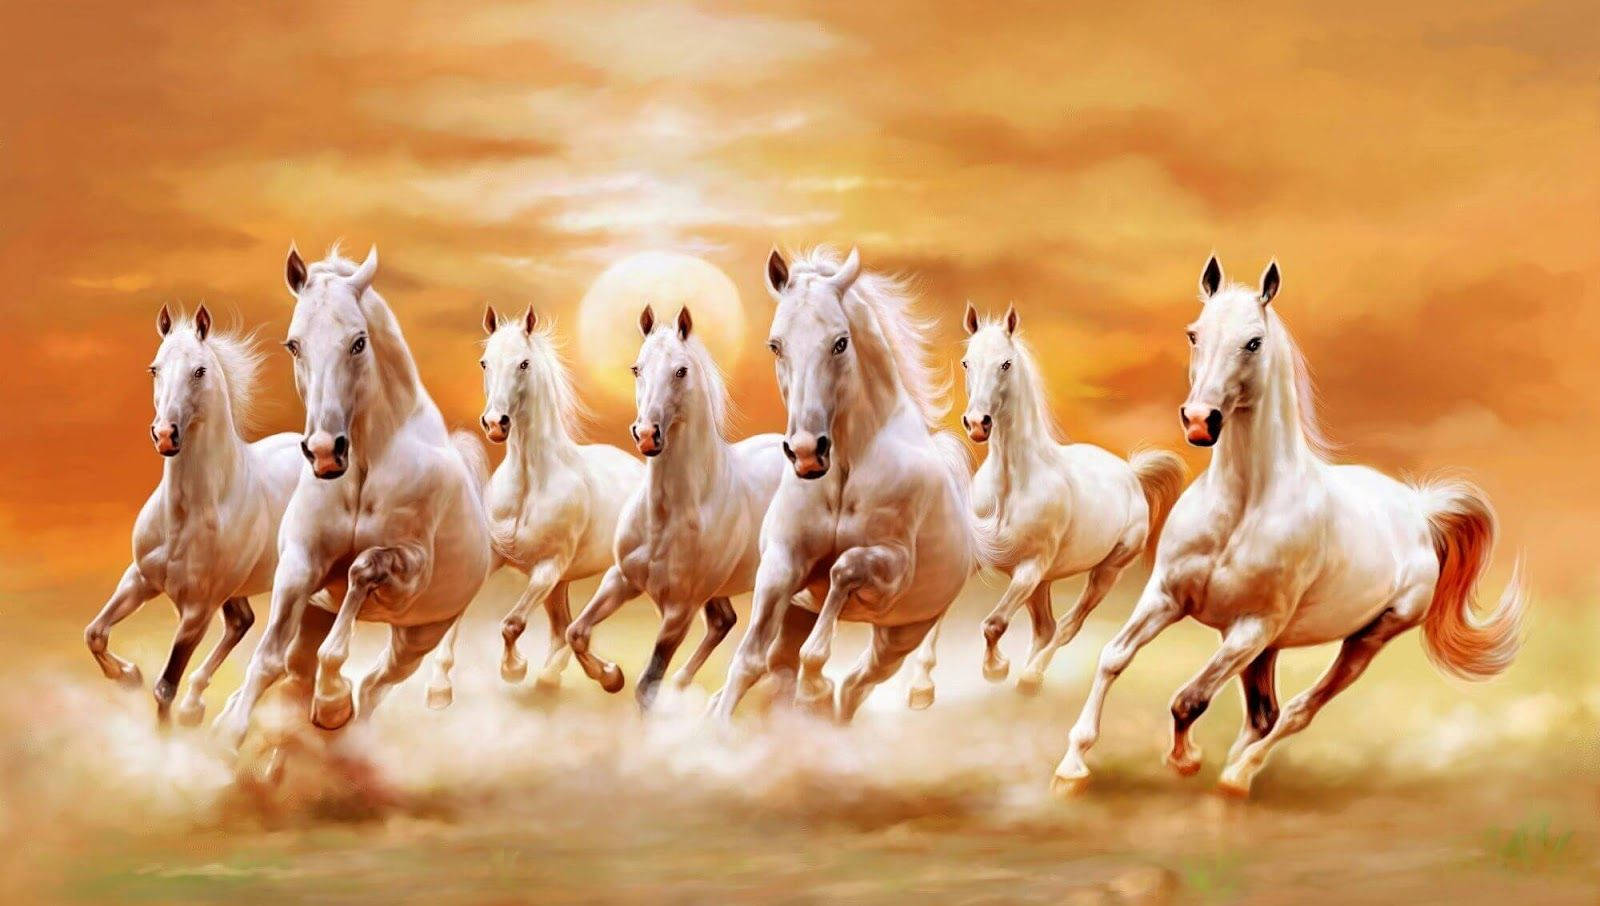 Galloping White Horses During Sunset Background